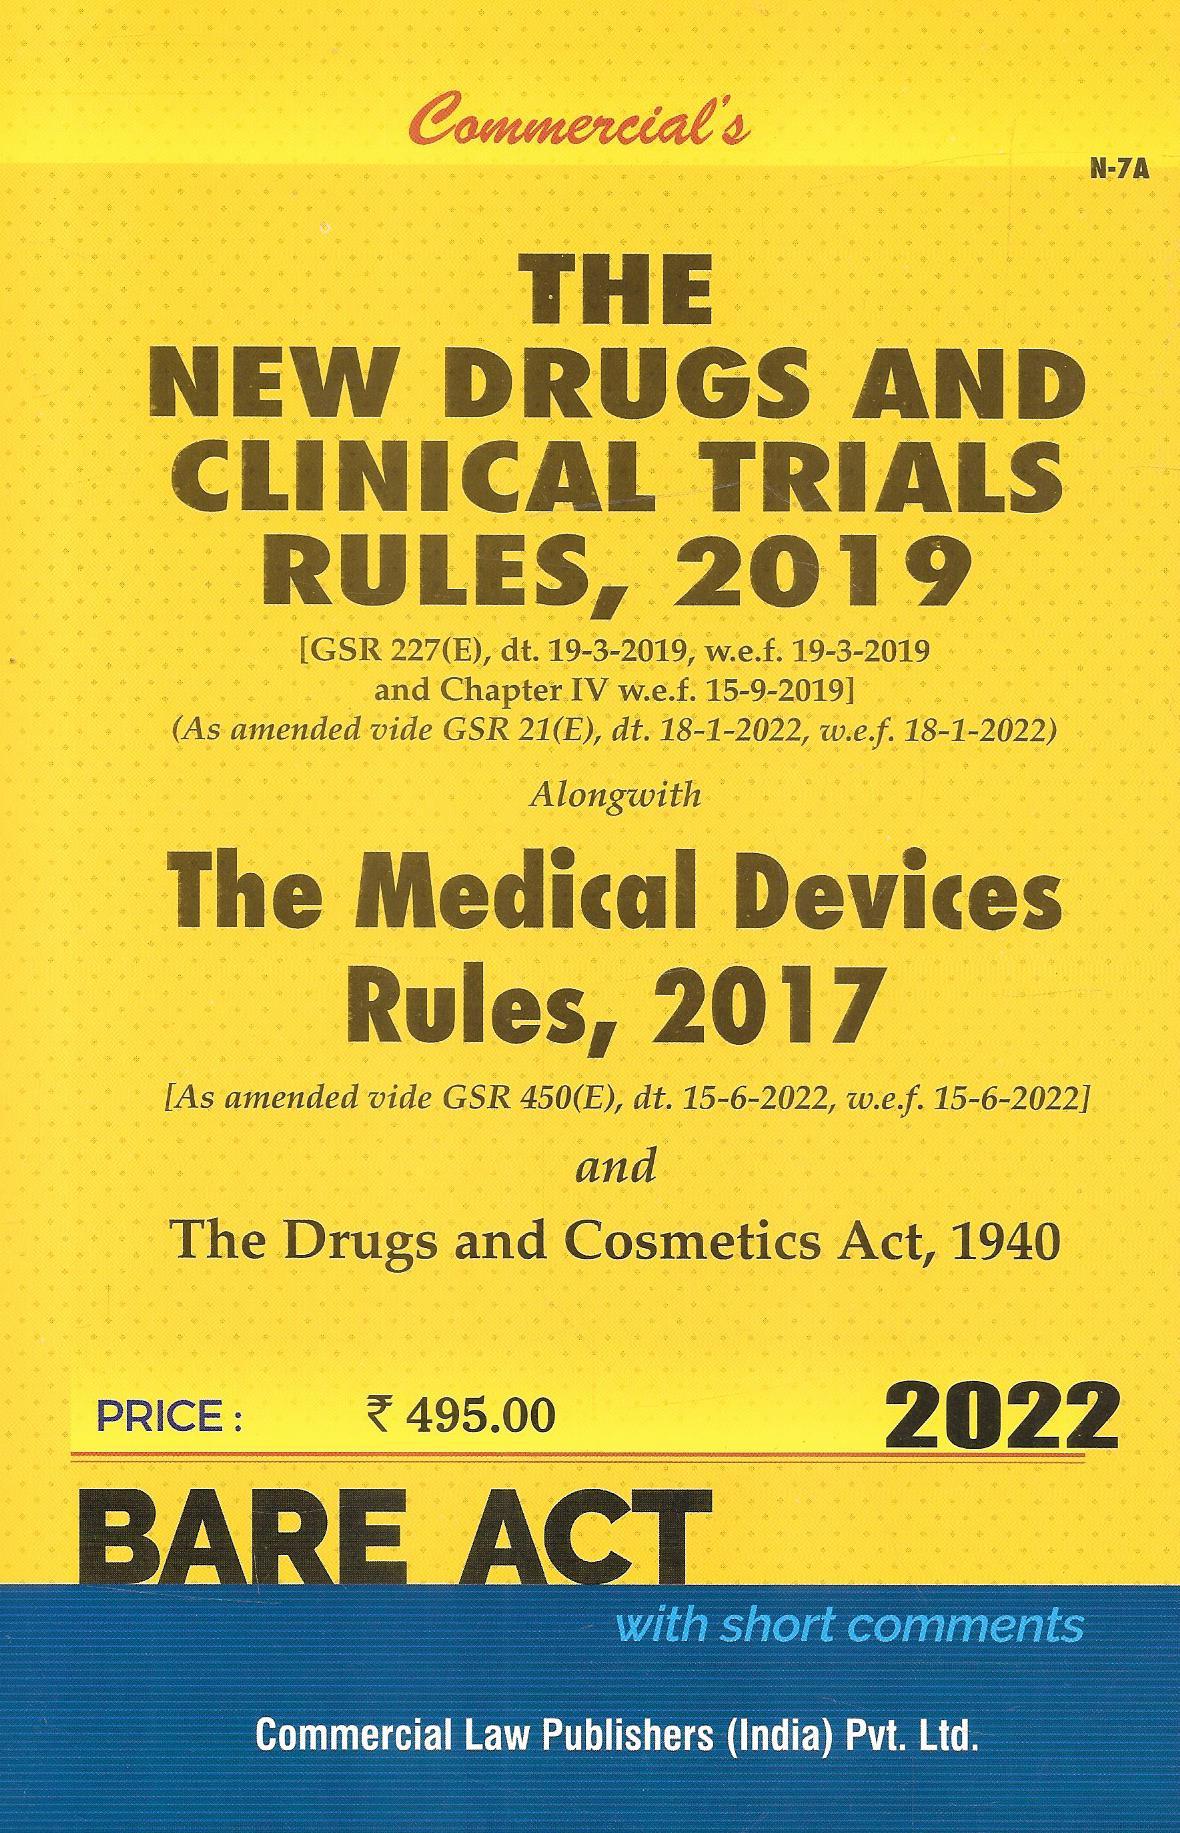 The New Drugs And Clinical Trials Rules, 2019 Alongwith The Medical Devices Rules , 2017 , The Drugs And  Cosmetics Act , 1940